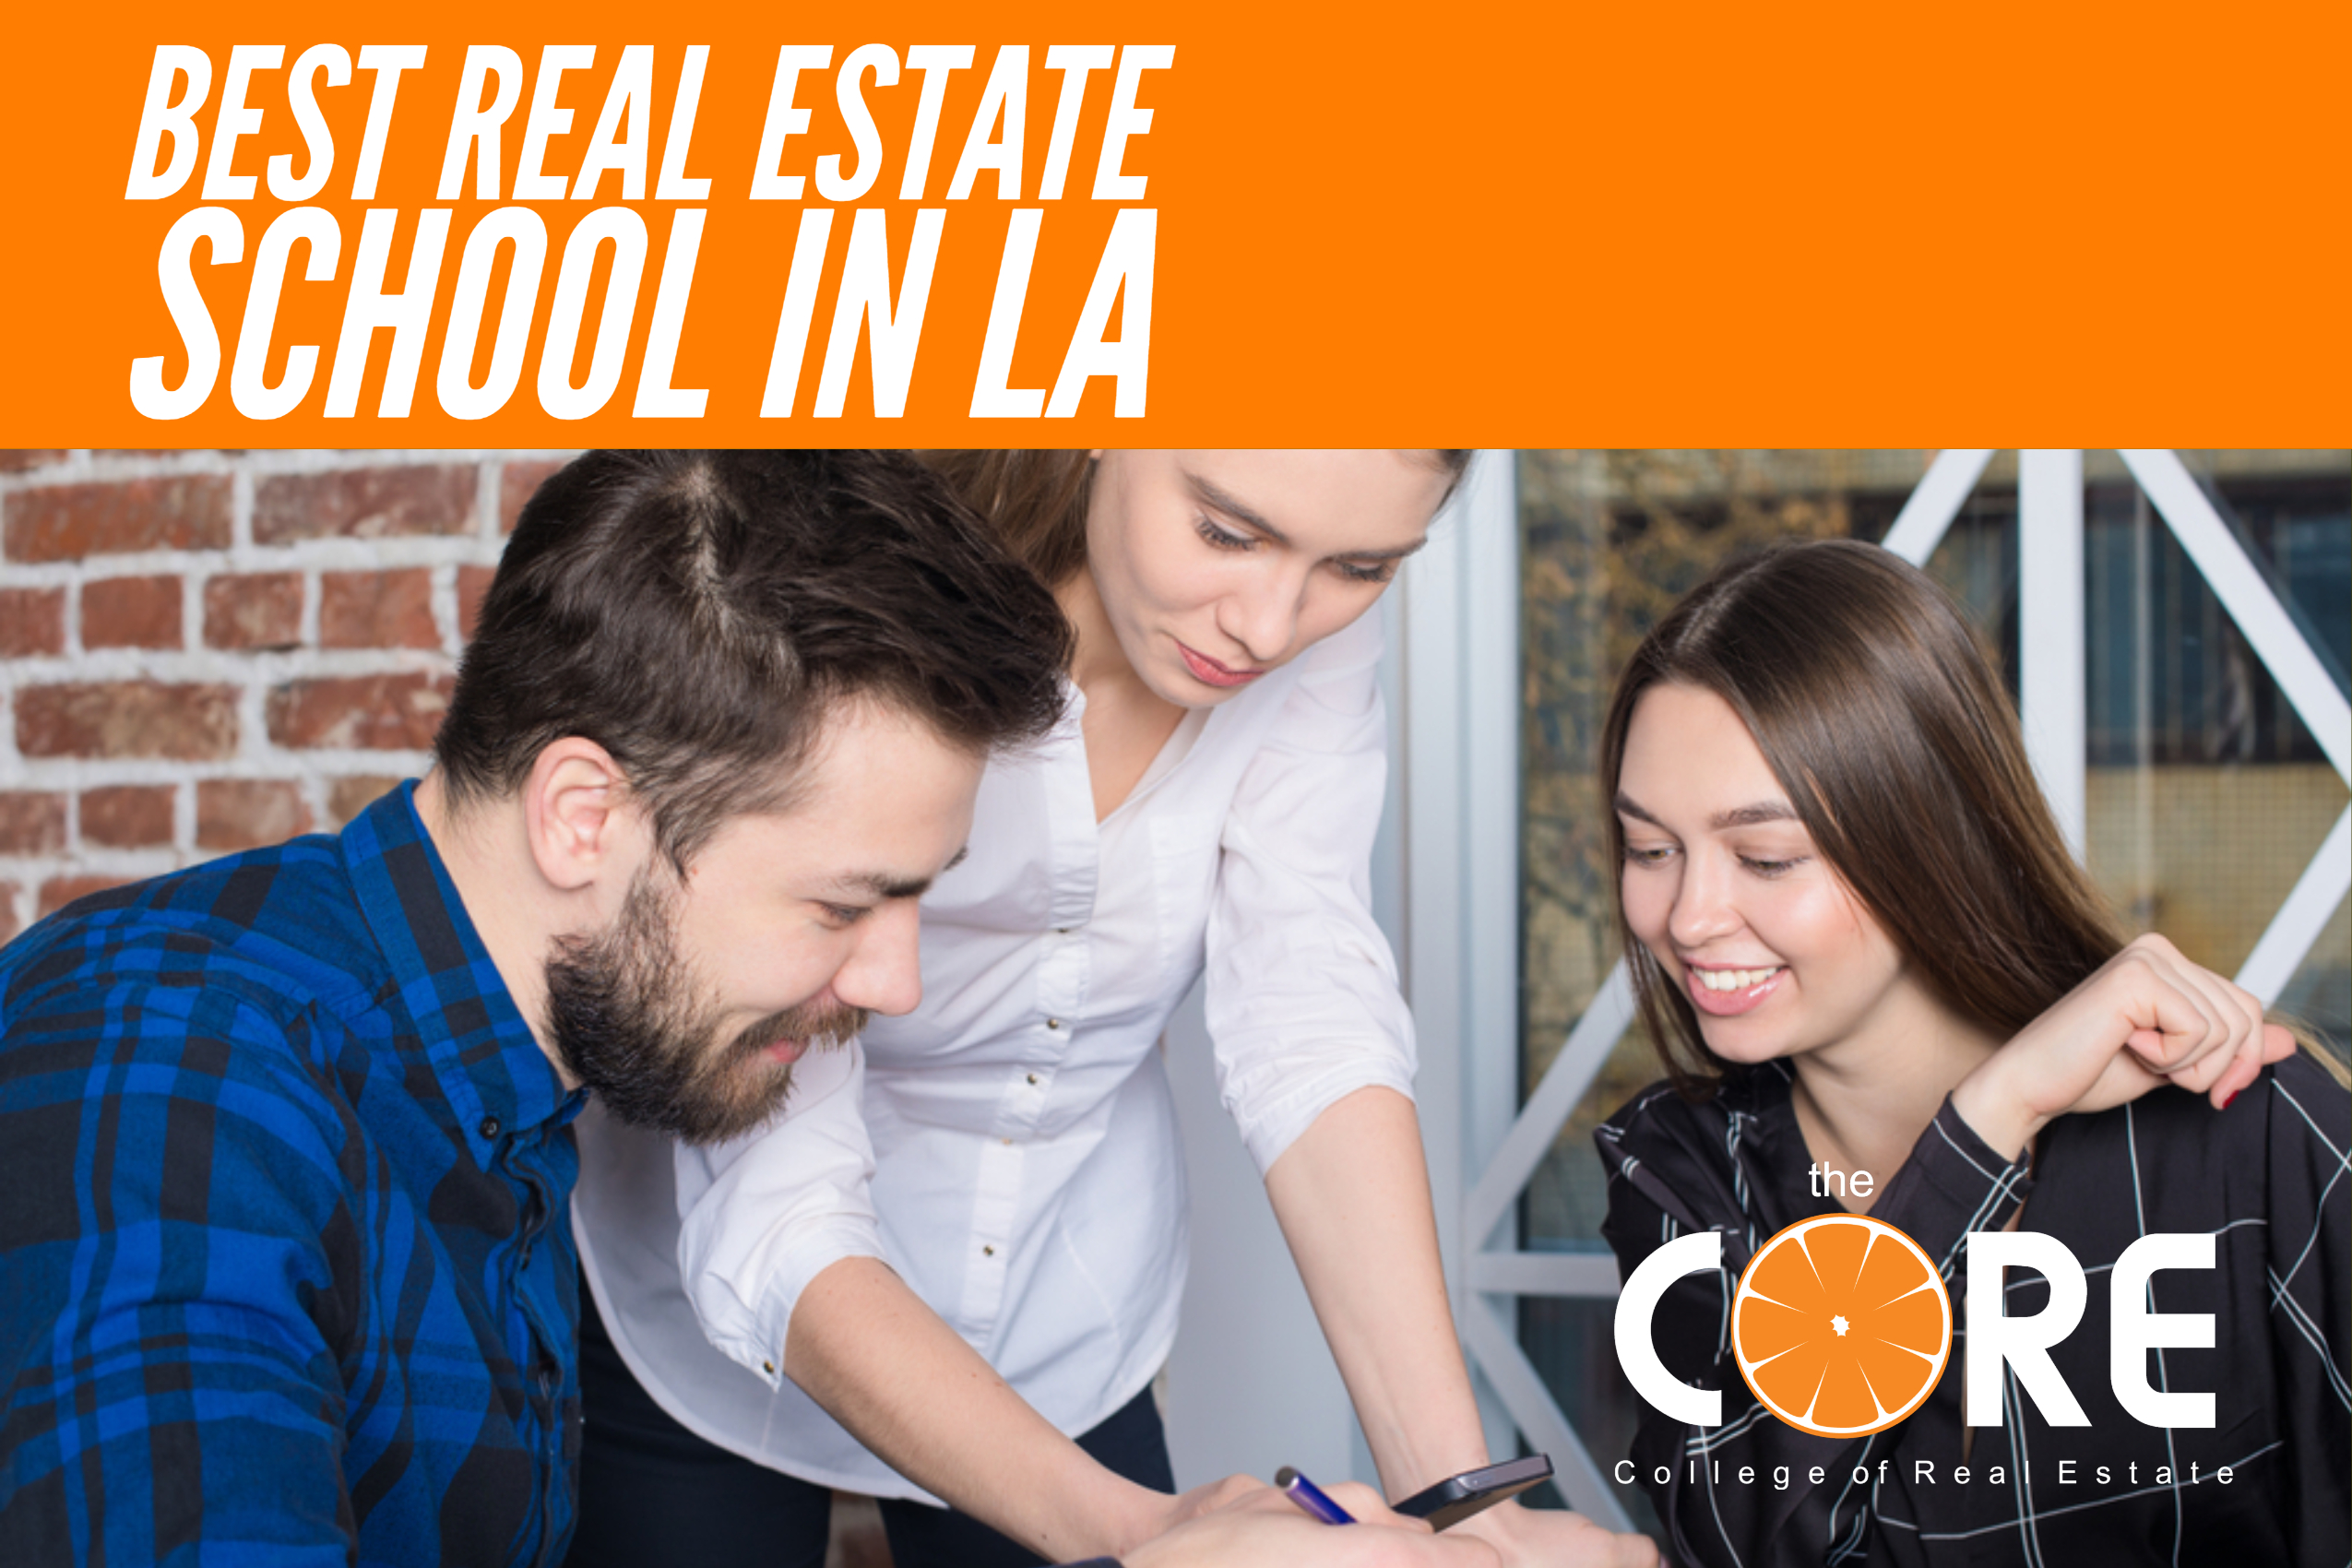 Get-Your-Real-Estate-License-Los-Angeles-Real-Estate-School-College-of-Real-Estate-theCORE.